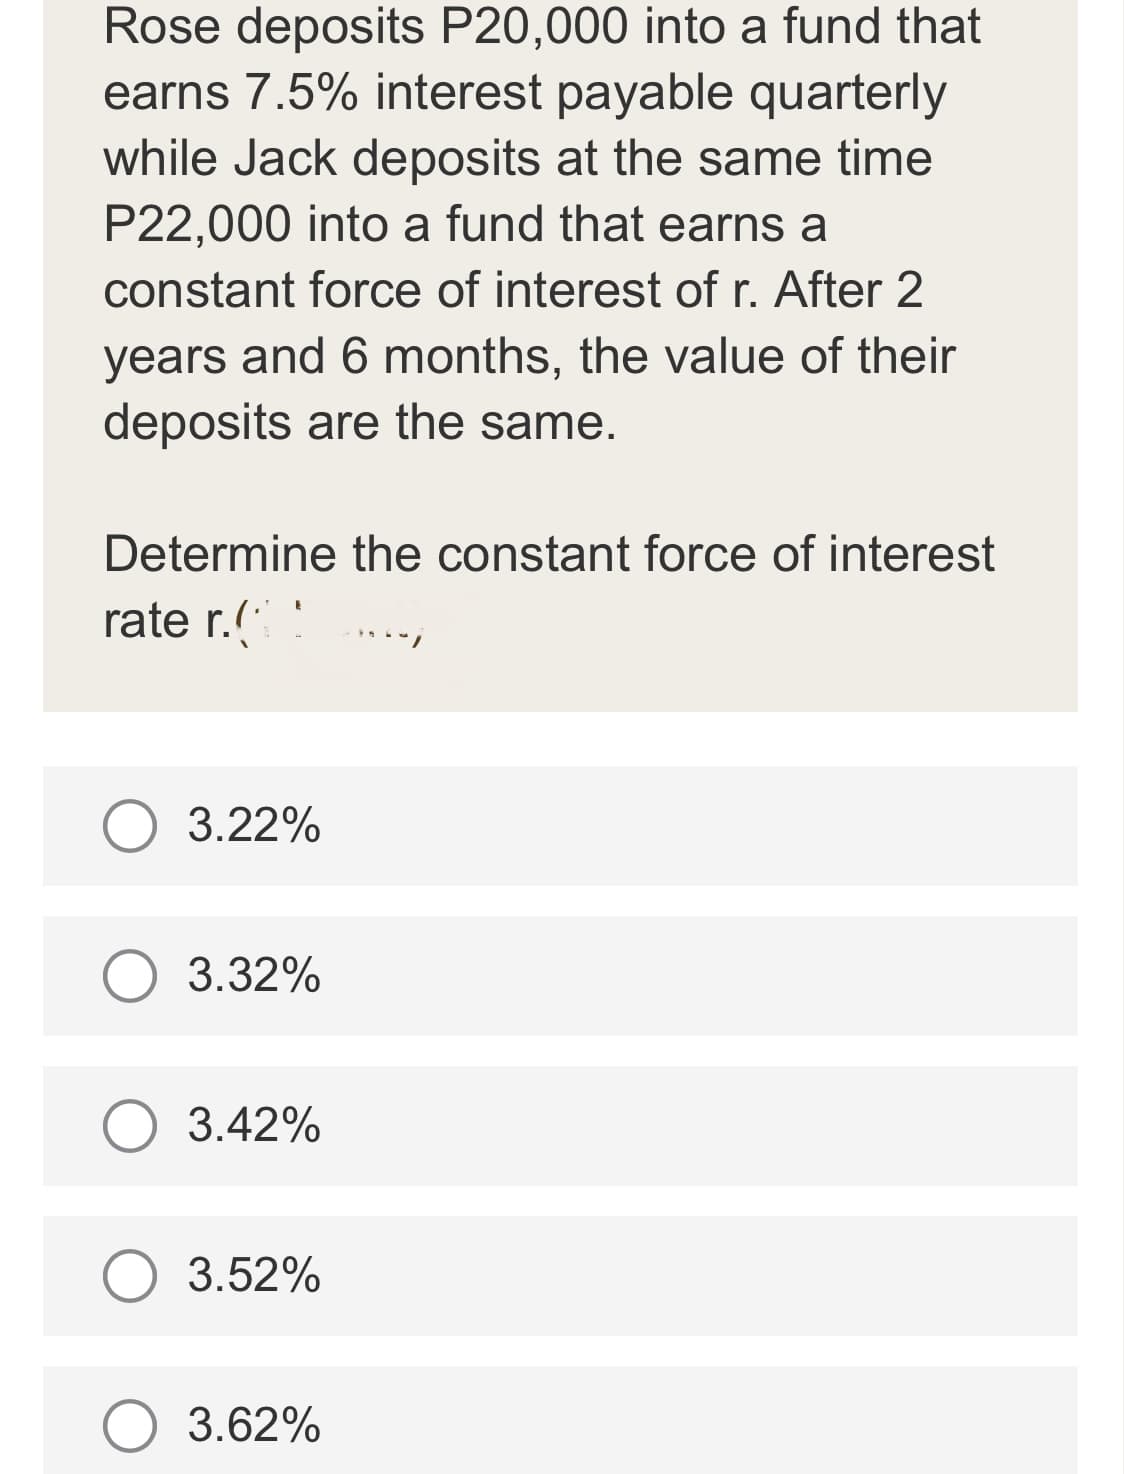 Rose deposits P20,000 into a fund that
earns 7.5% interest payable quarterly
while Jack deposits at the same time
P22,000 into a fund that earns a
constant force of interest of r. After 2
years and 6 months, the value of their
deposits are the same.
Determine the constant force of interest
rate r.(
O 3.22%
3.32%
O 3.42%
3.52%
O 3.62%